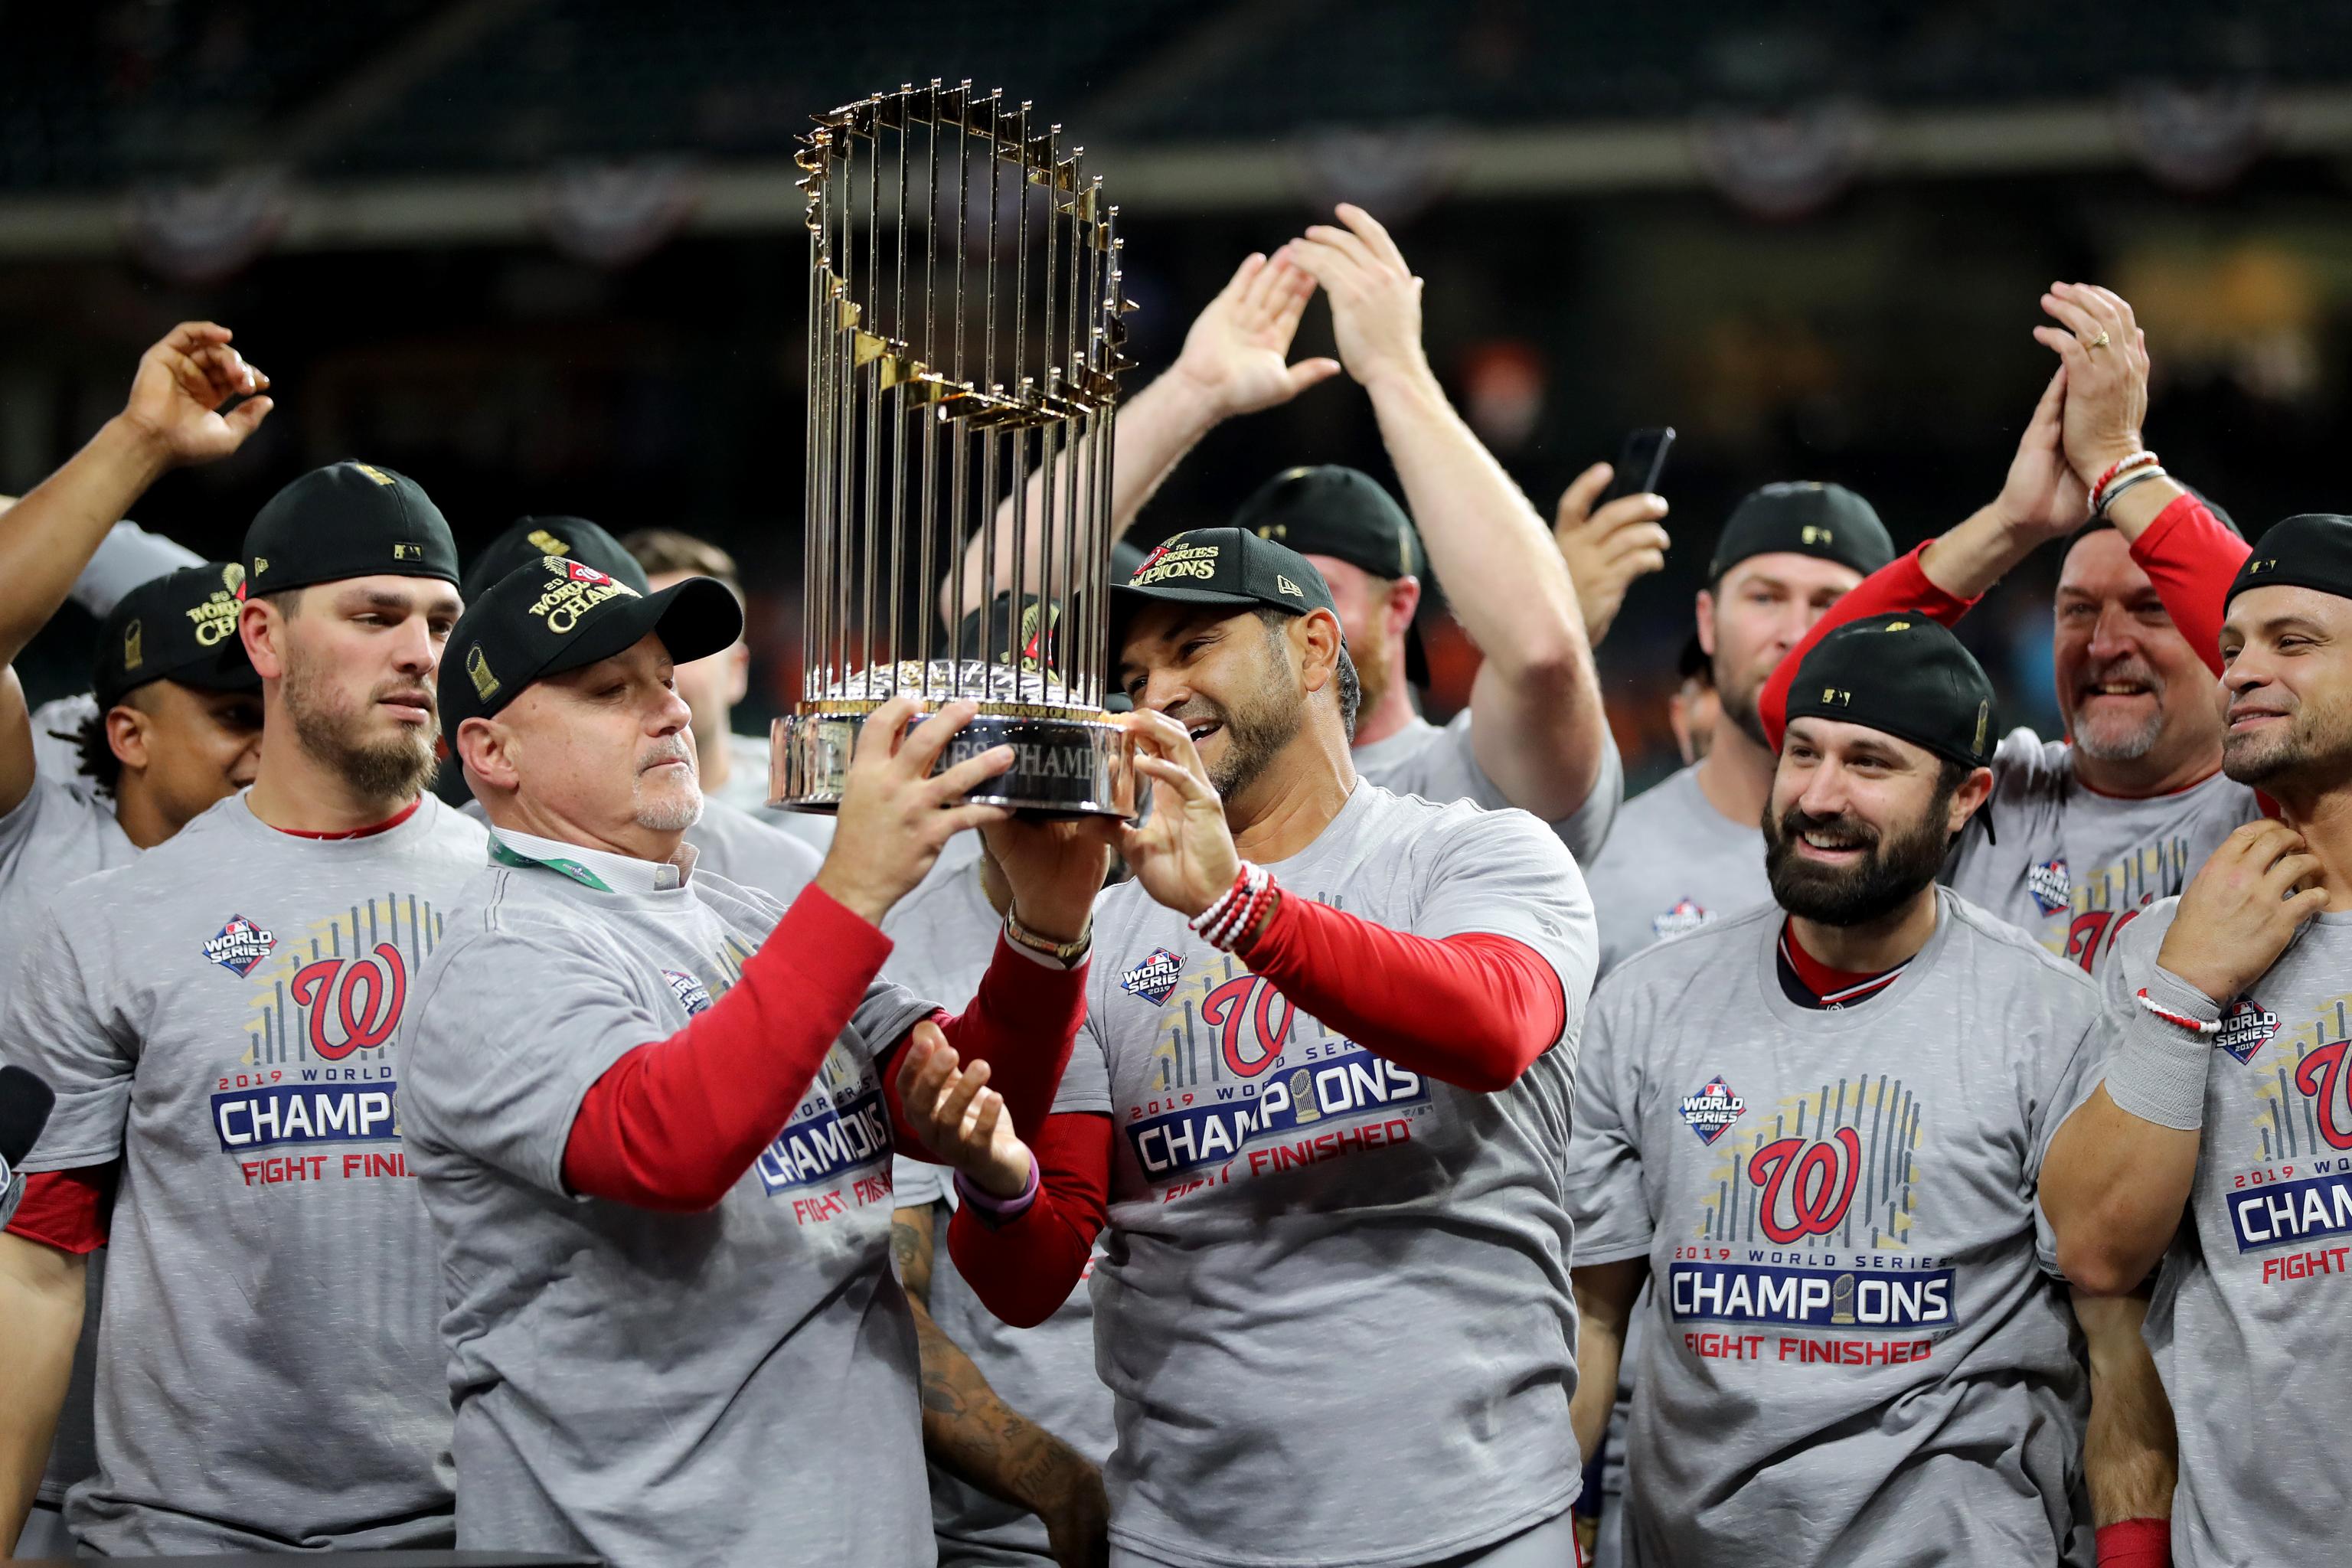 Fight Finished: Nationals Unveil 2019 World Series Rings